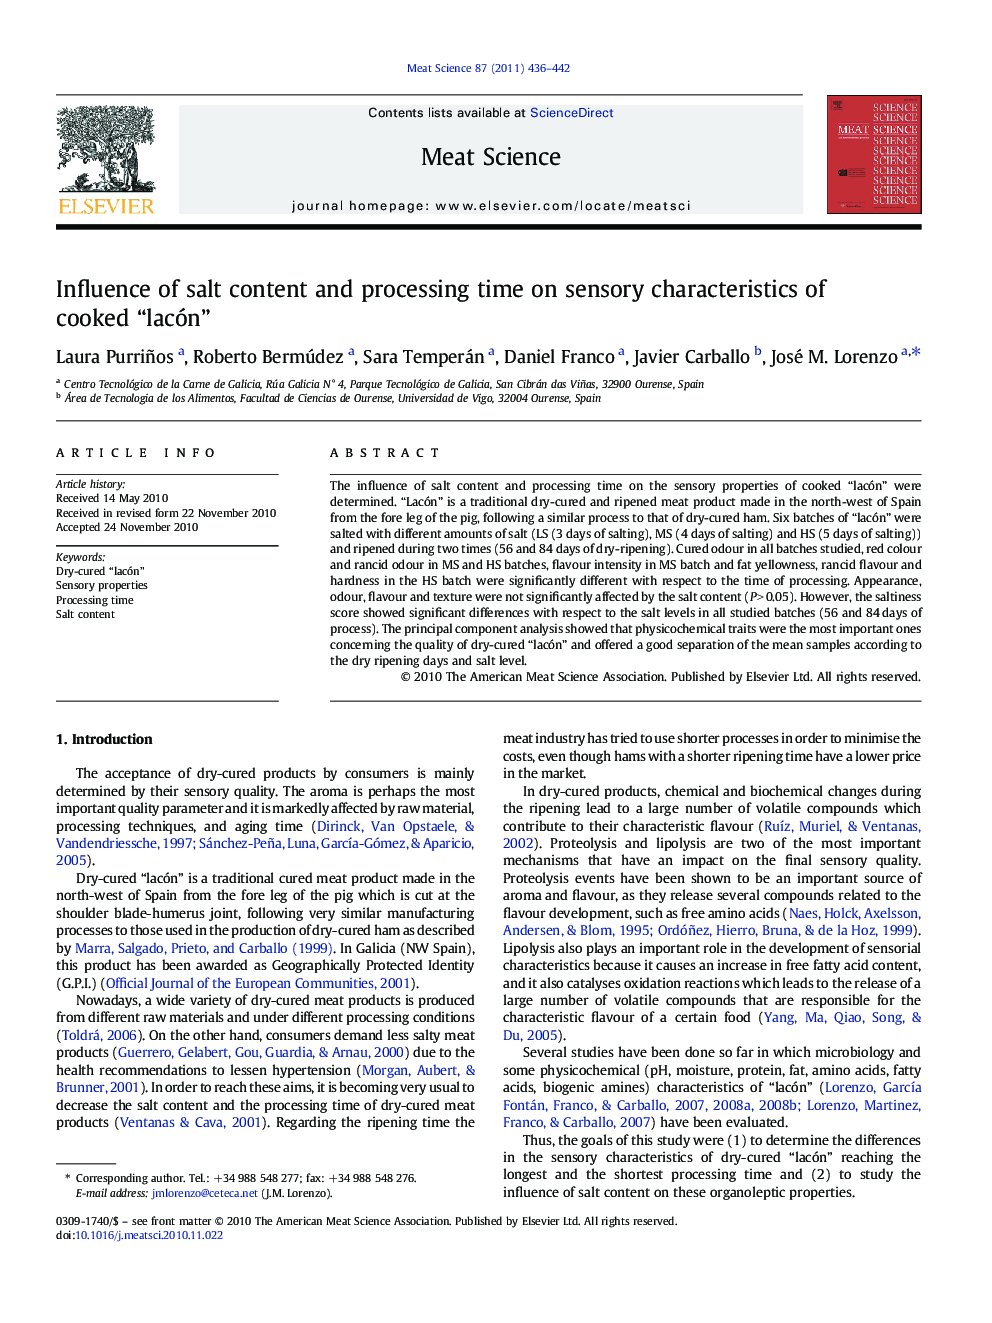 Influence of salt content and processing time on sensory characteristics of cooked “lacón”